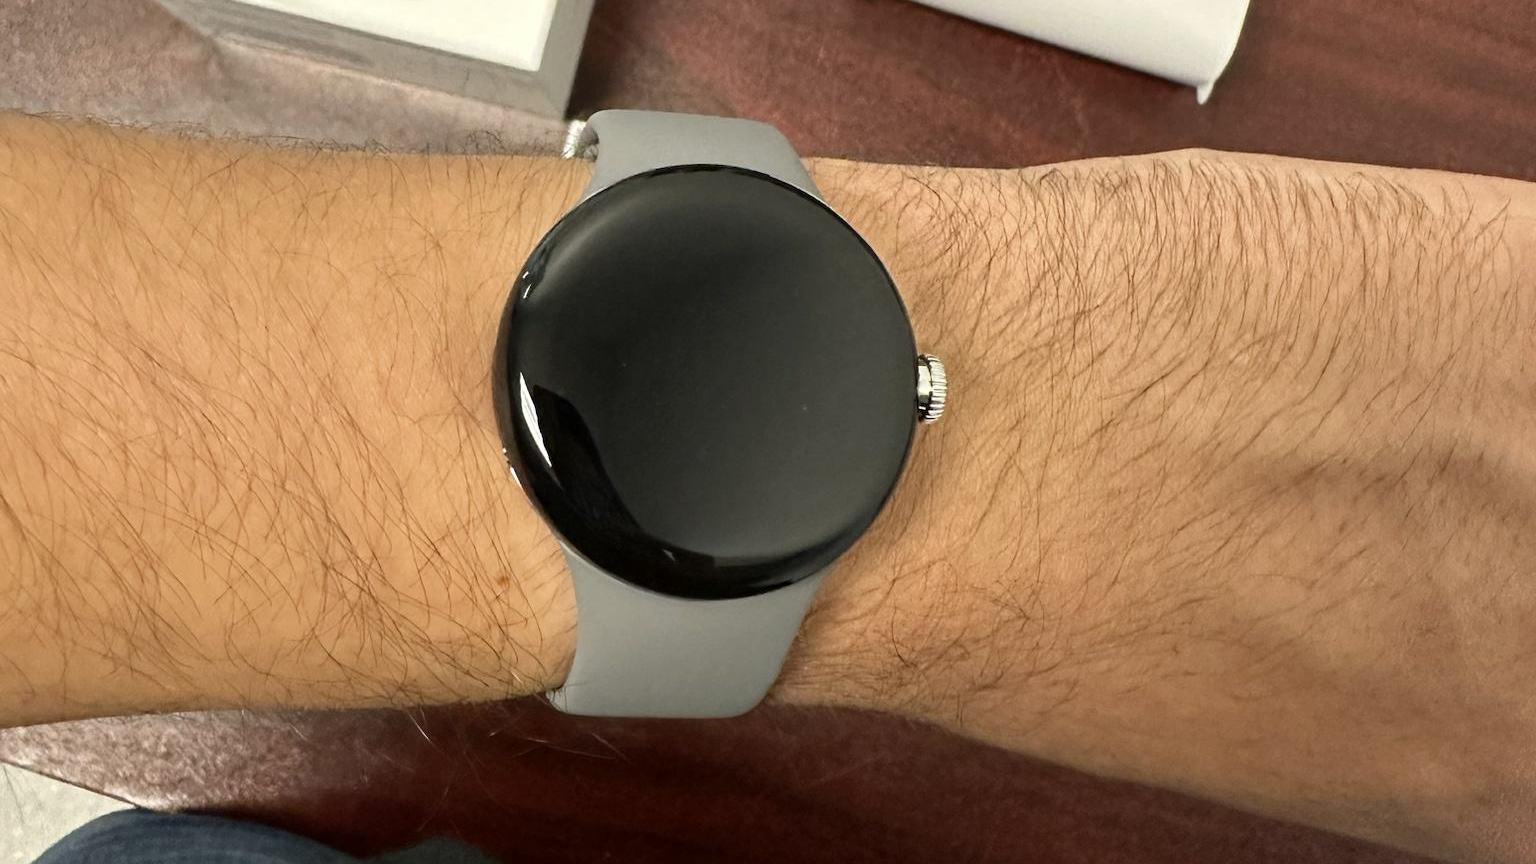 Pre-release unboxing of what appears to be the Google Pixel Watch